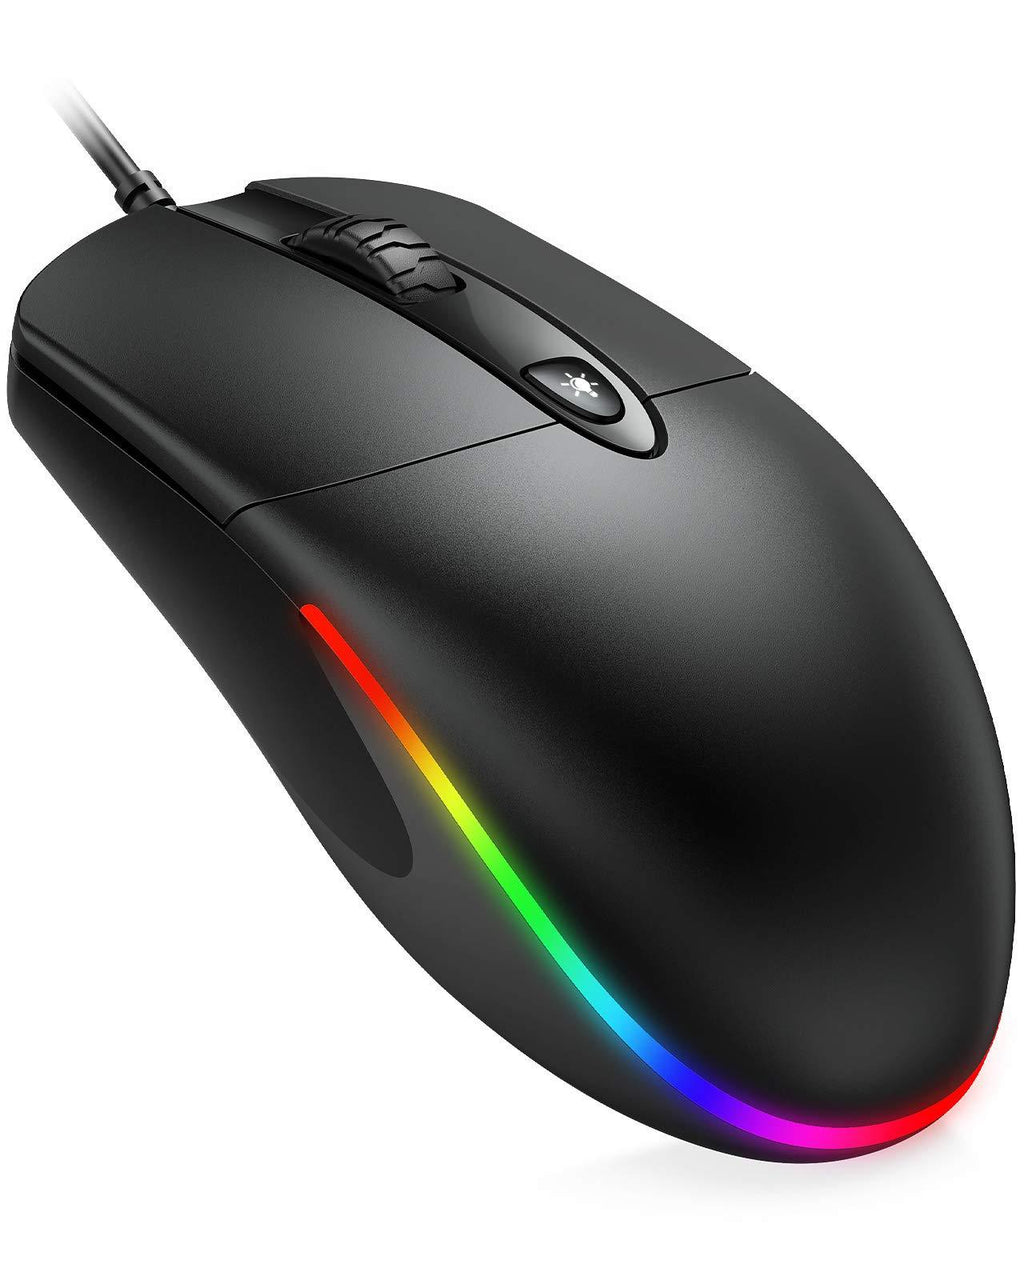  [AUSTRALIA] - USB Wired Mouse,RGB Optical Silent Computer Mouse,1600 DPI Office and Home Mice,for Windows PC, Laptop, Desktop, Notebook Black